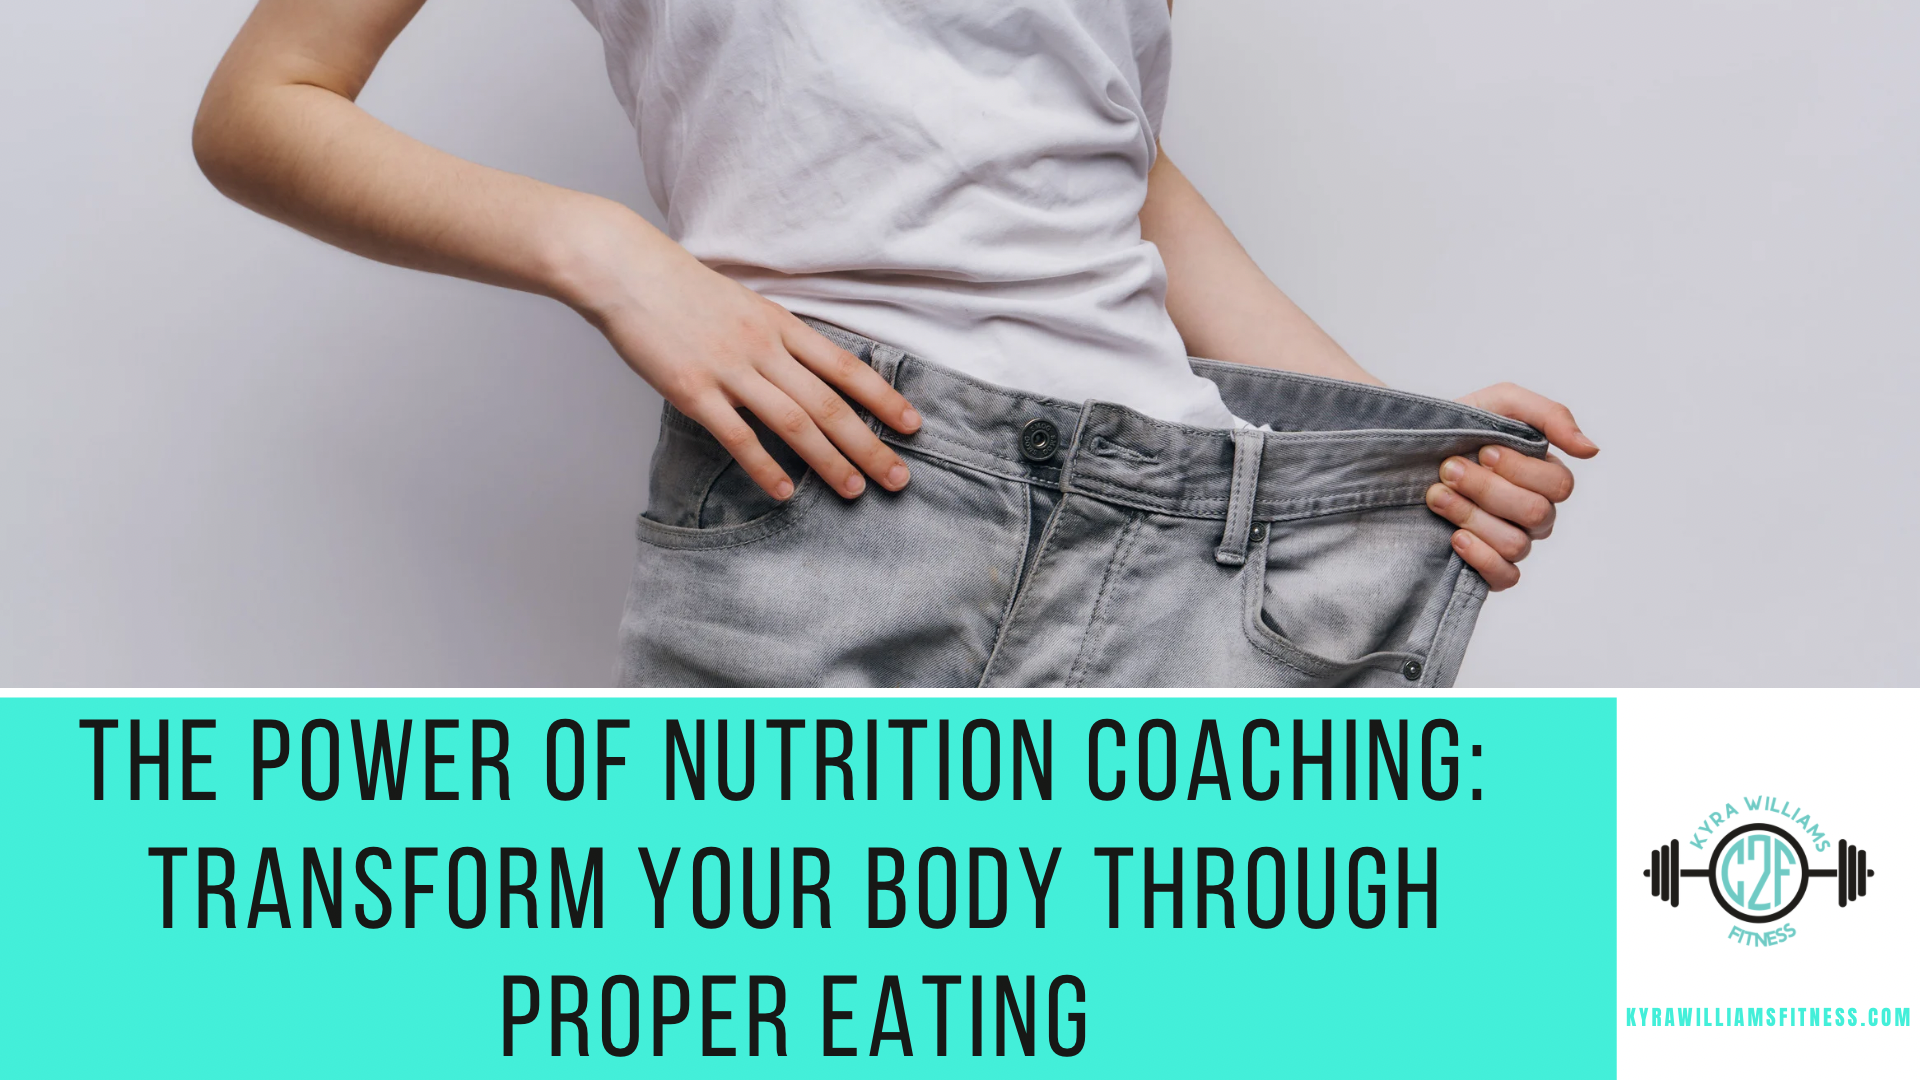 The Power of Nutrition Coaching: Transform Your Body Through Proper Eating